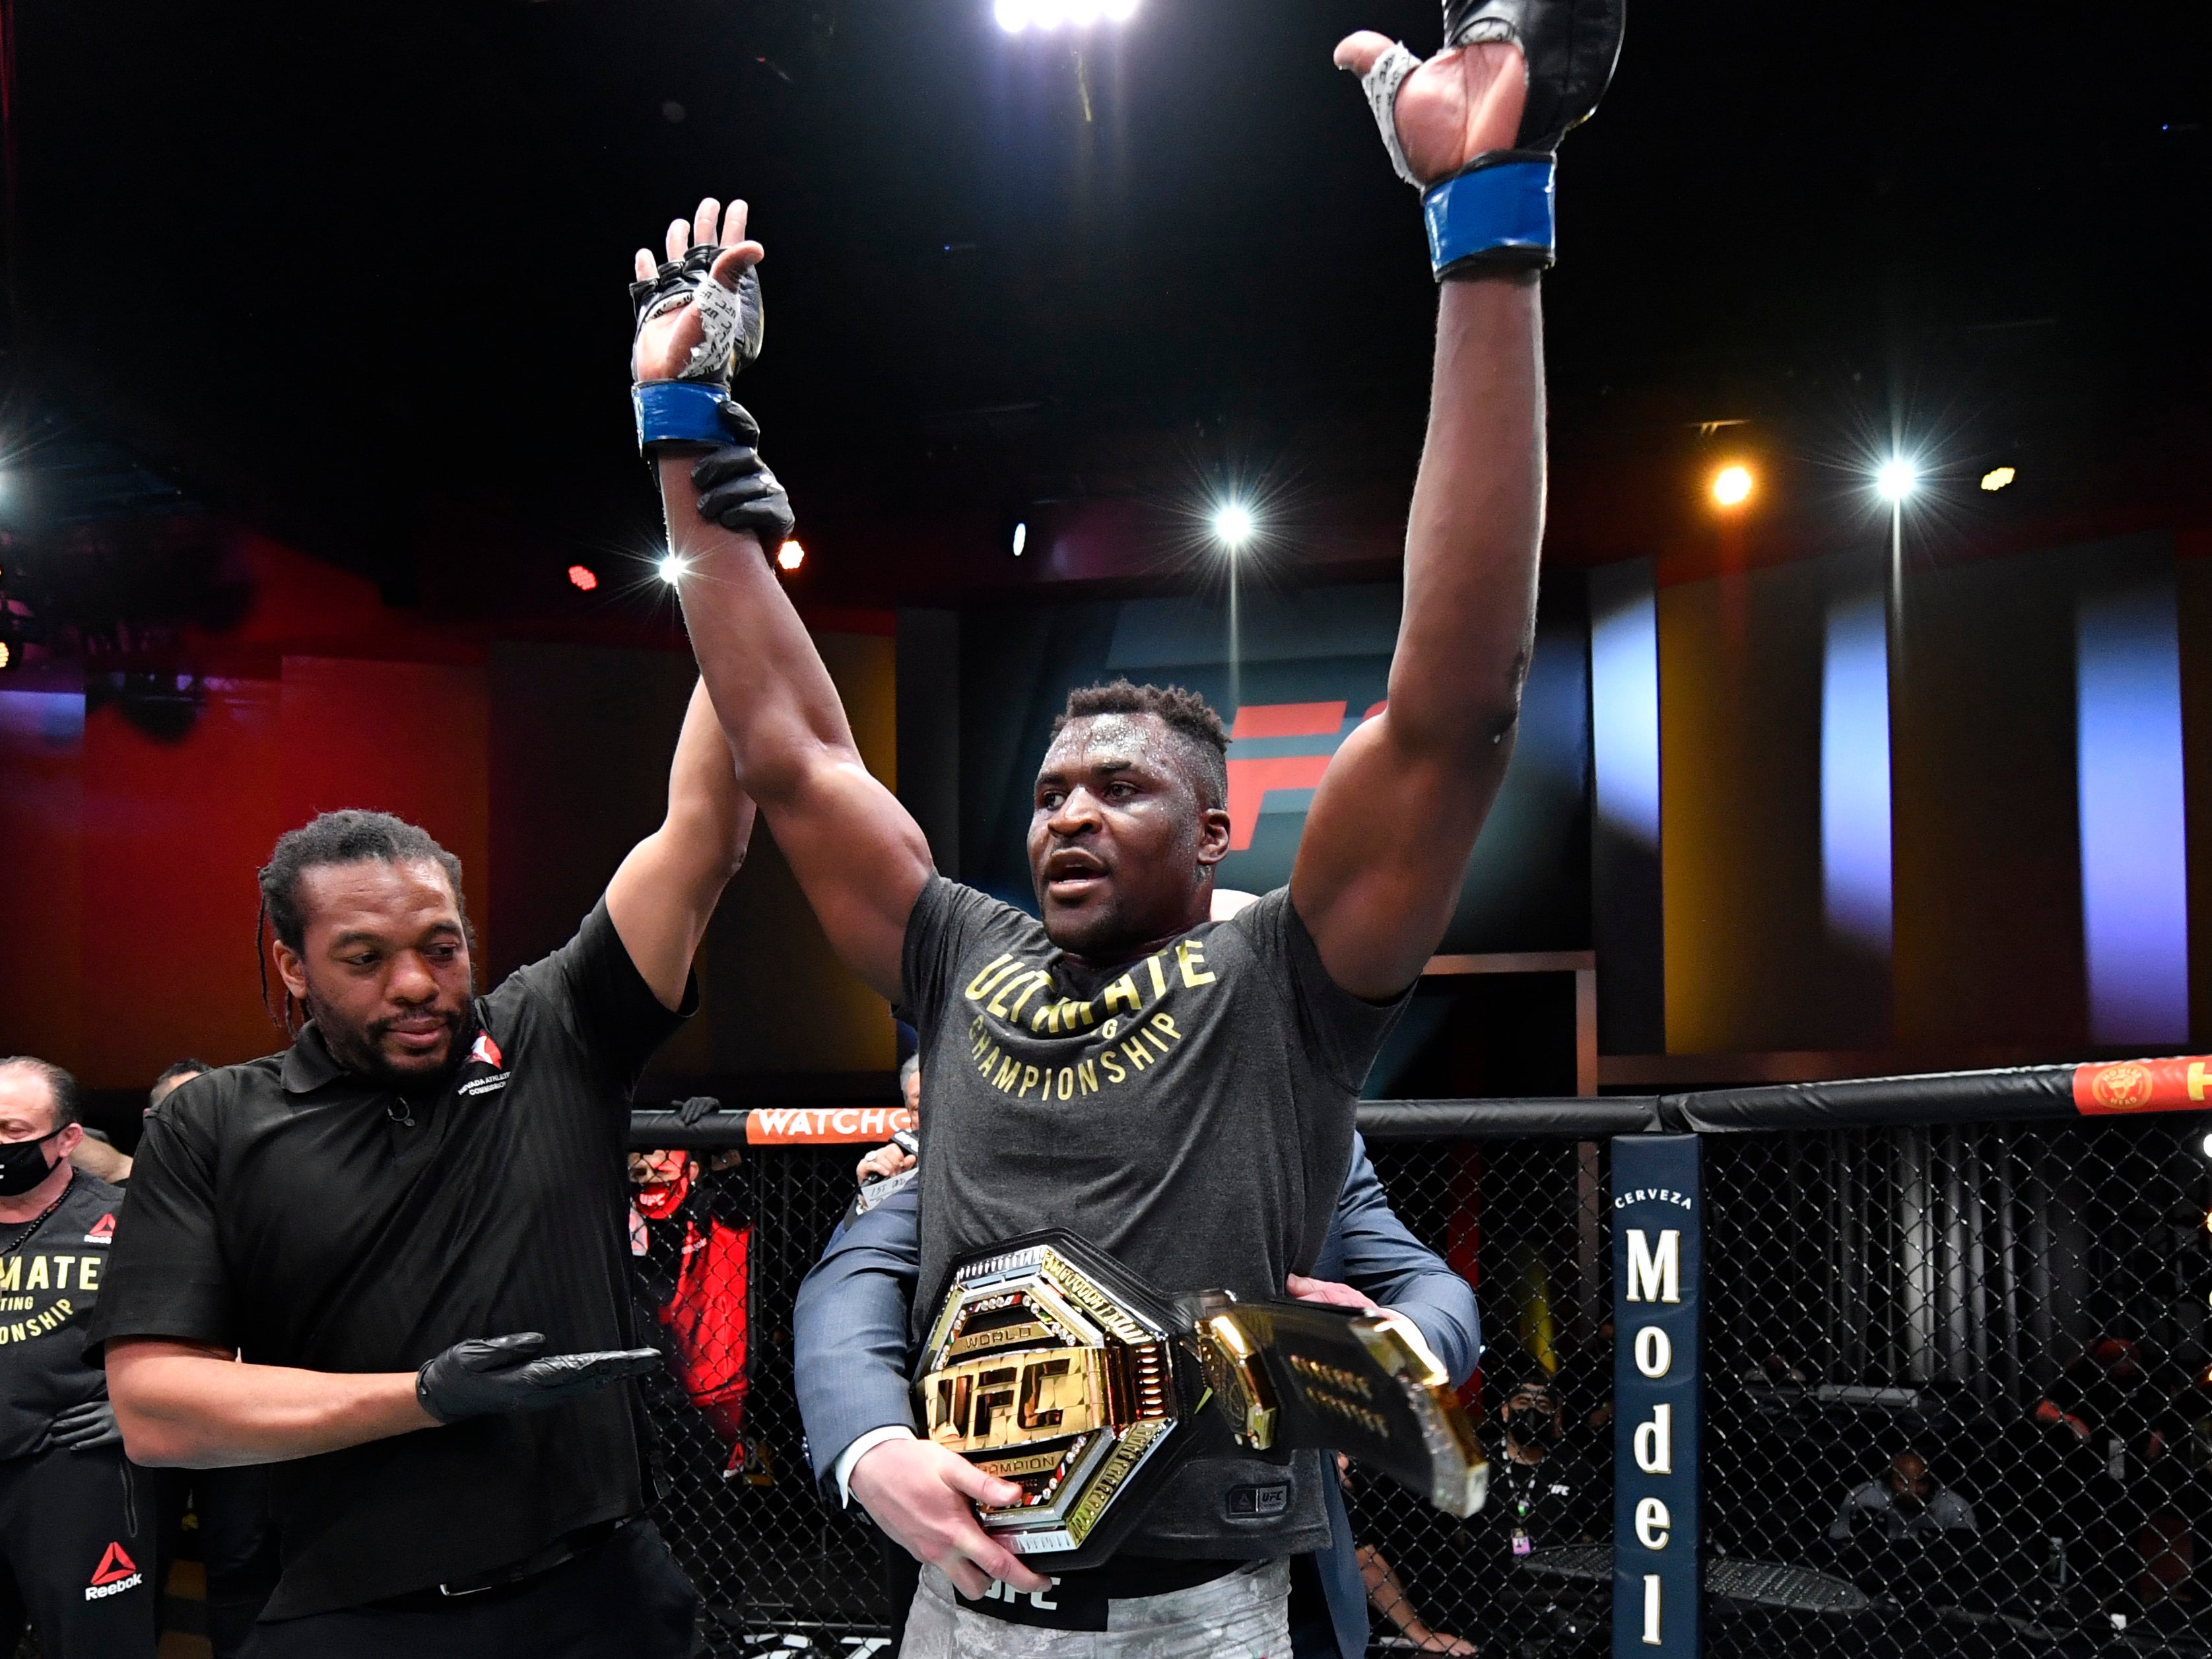 Francis Ngannou was crowned UFC heavyweight champion at UFC 260 last week